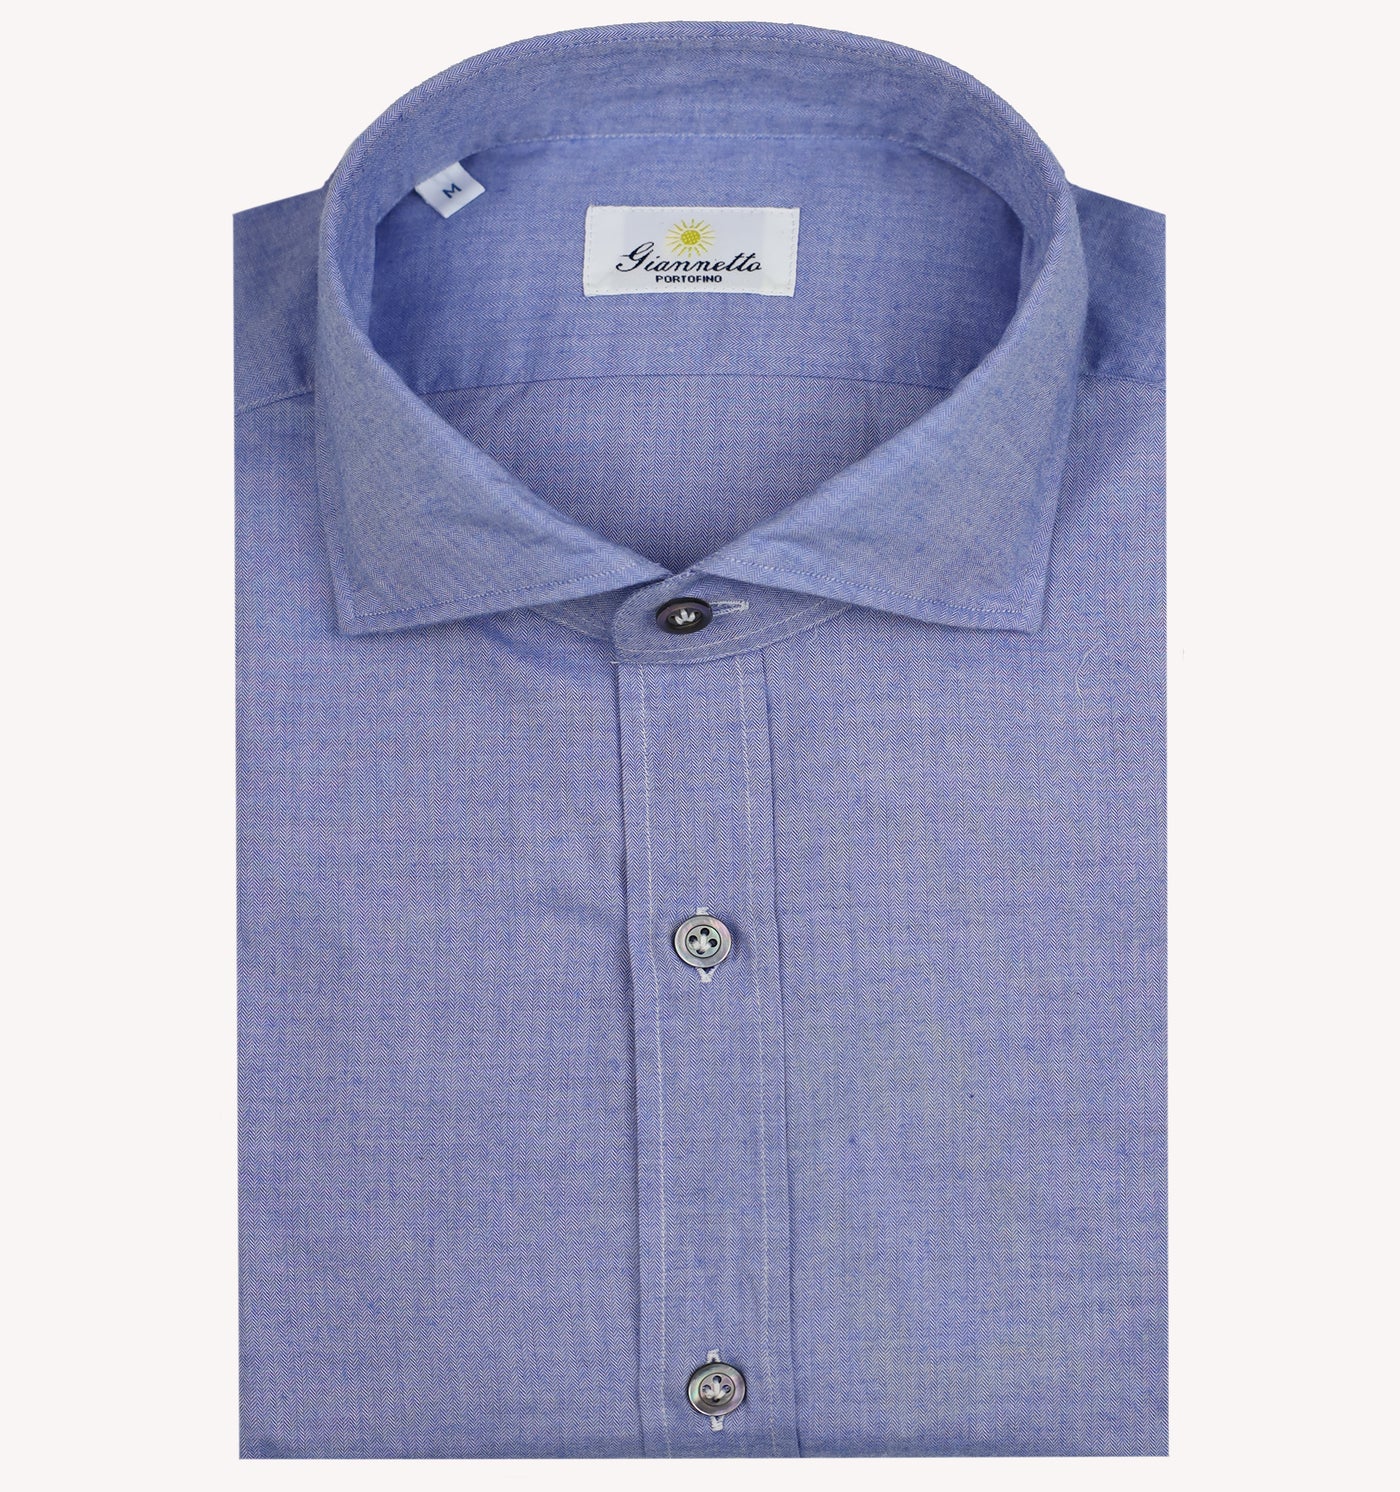 Giannetto Sport Shirt in Blue